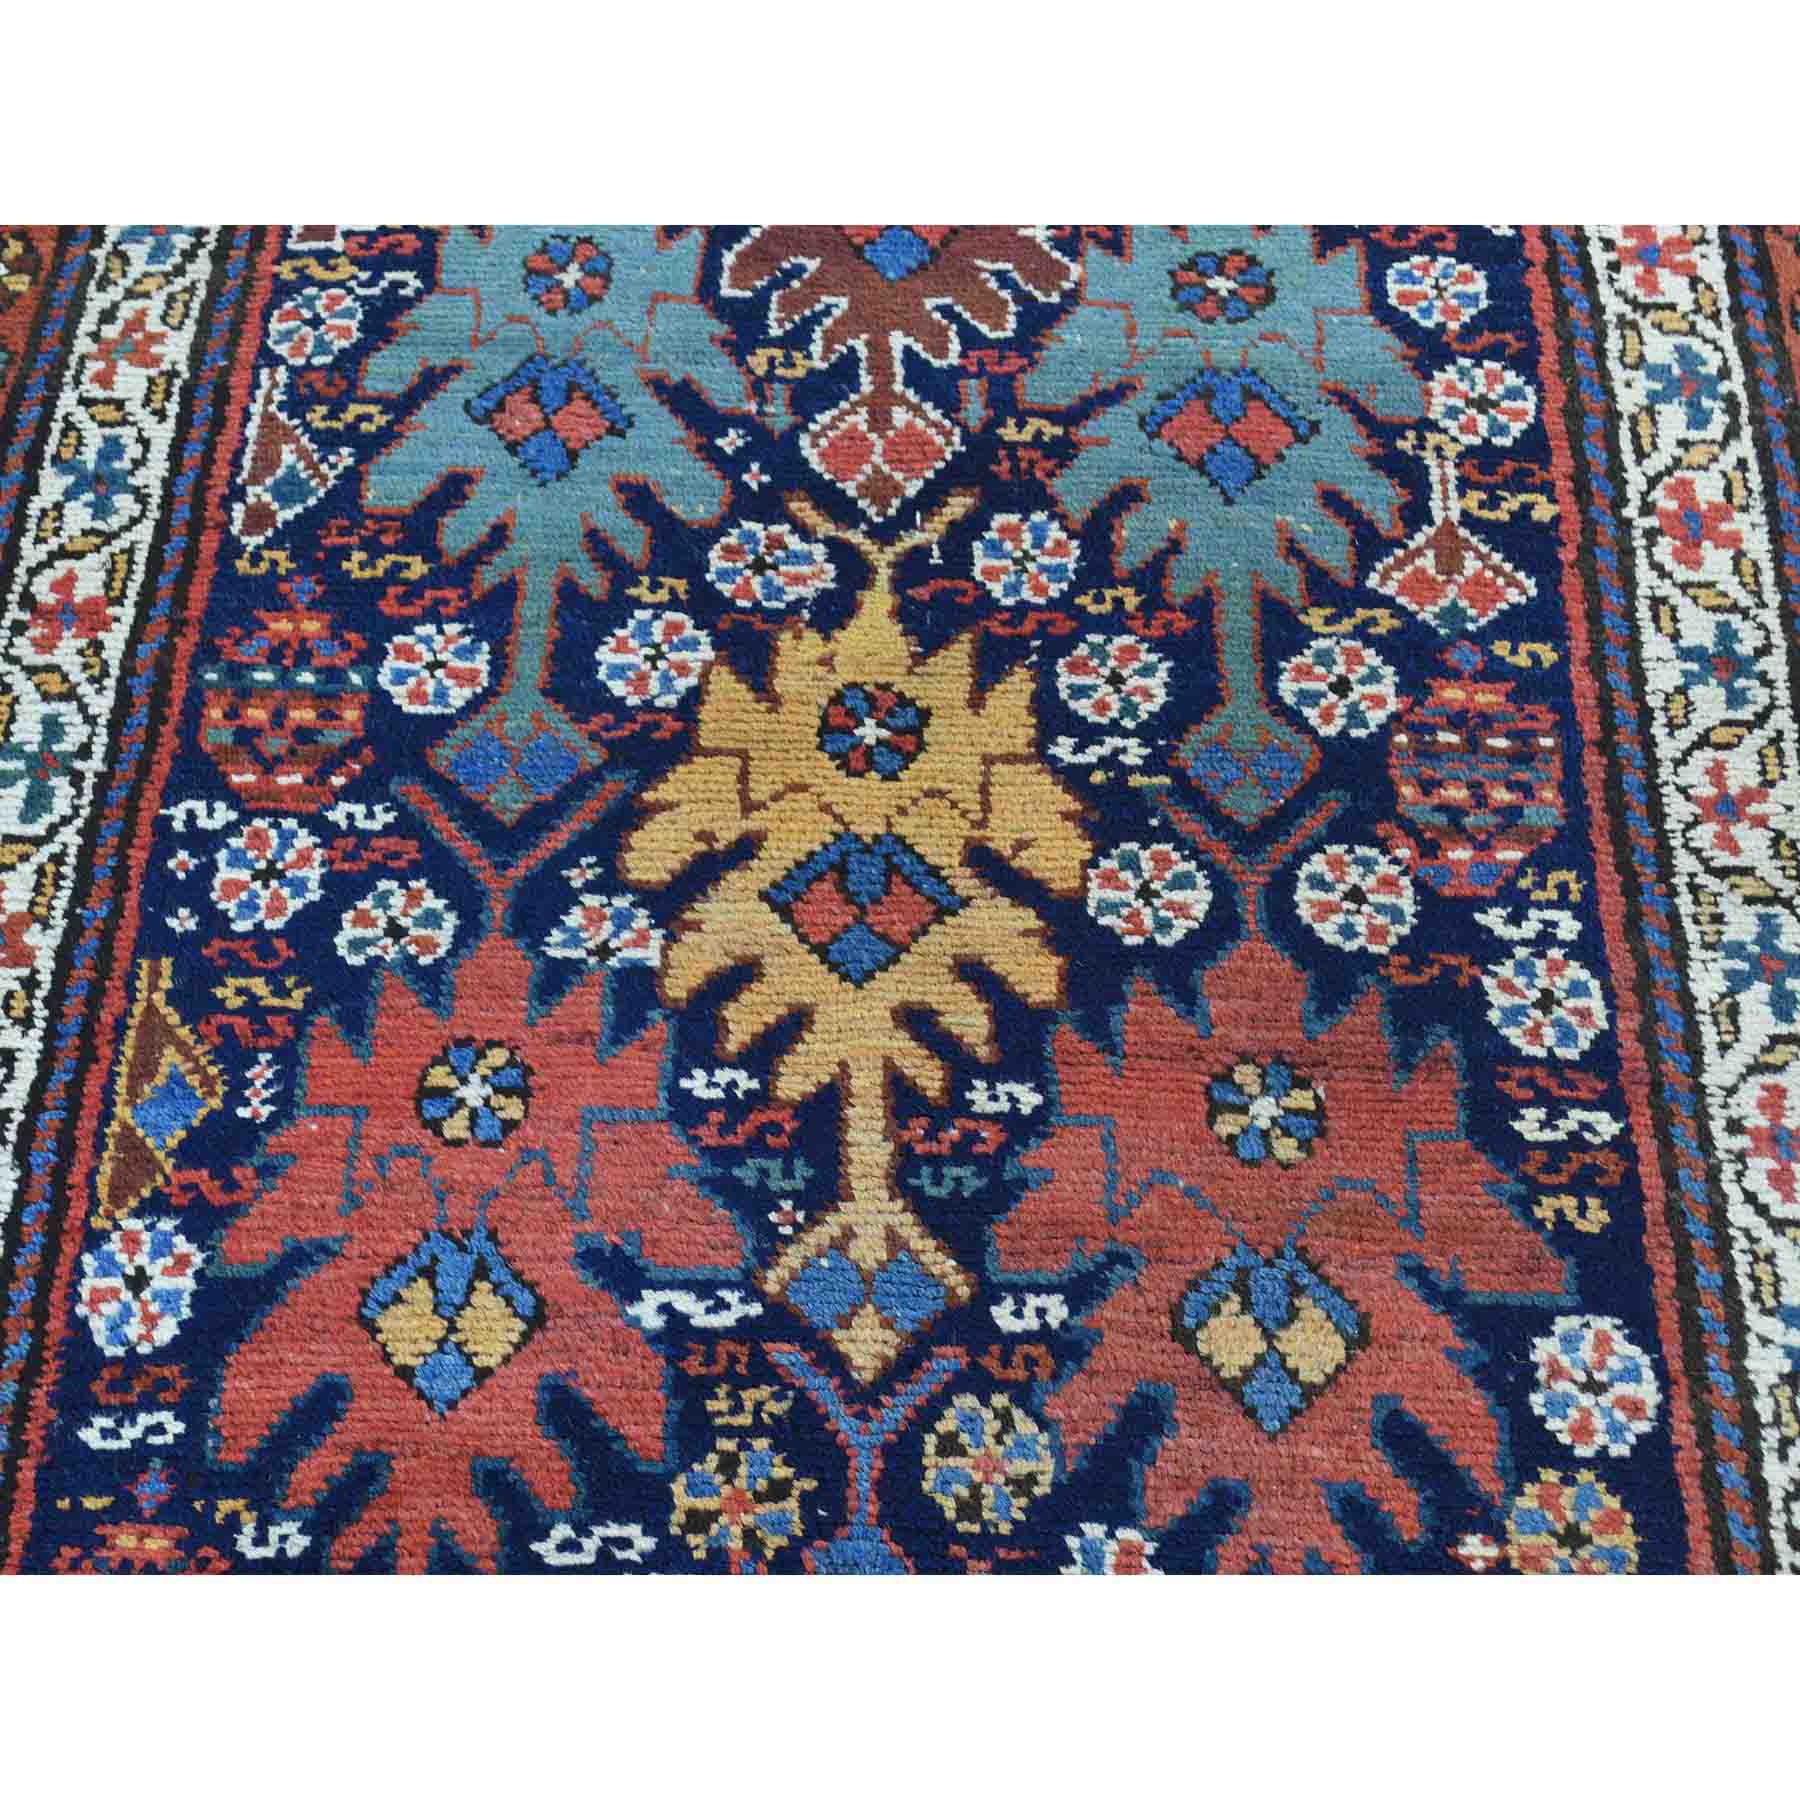 Antique-Hand-Knotted-Rug-181335